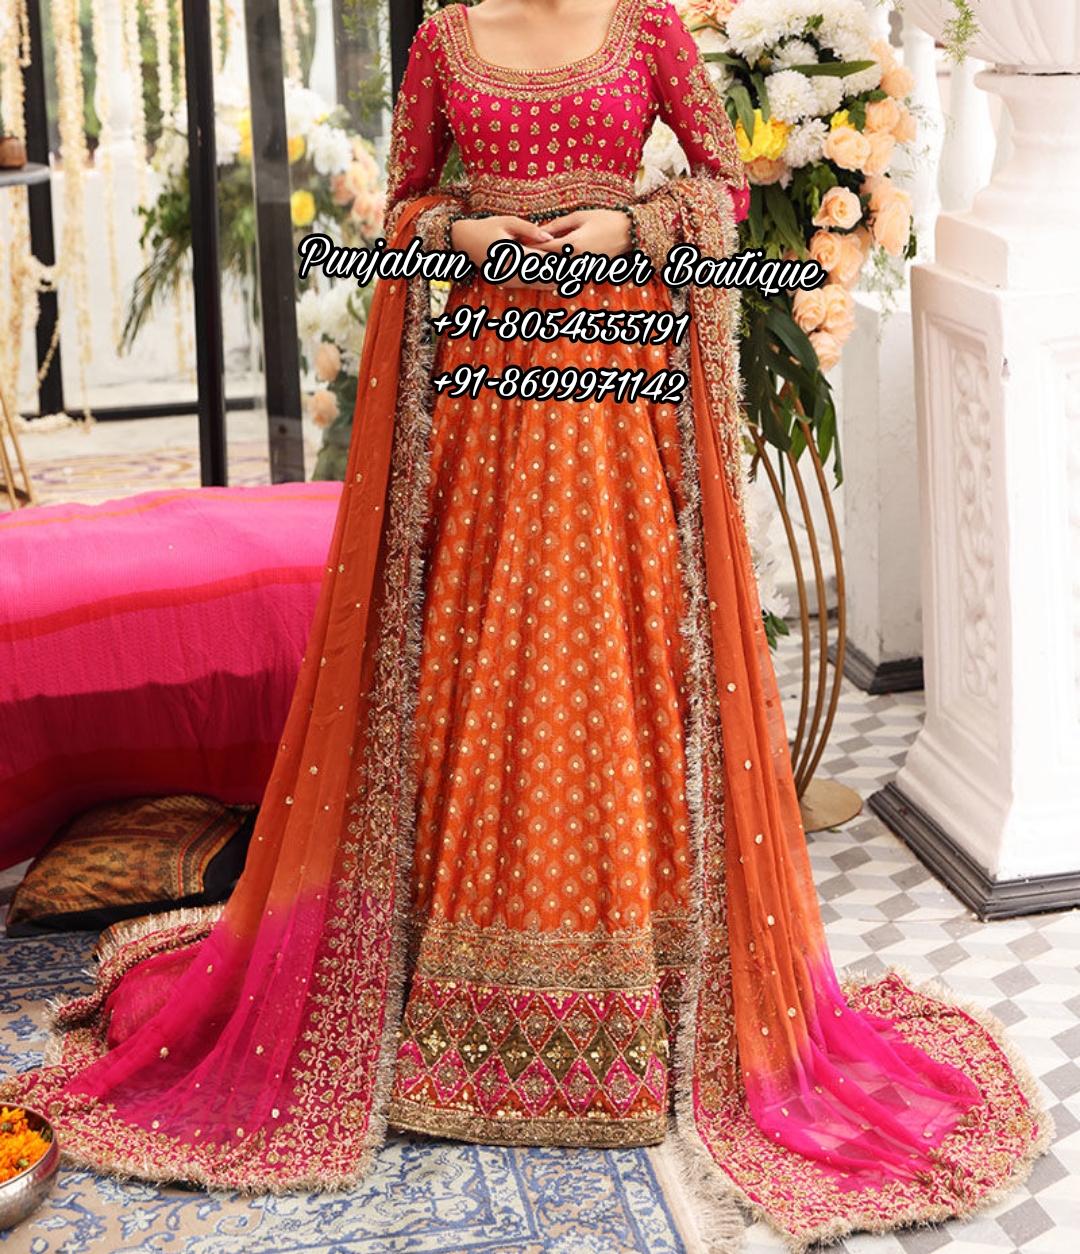 TOP 10 BEST Indian Bridal Wear in Edison, NJ - March 2024 - Yelp